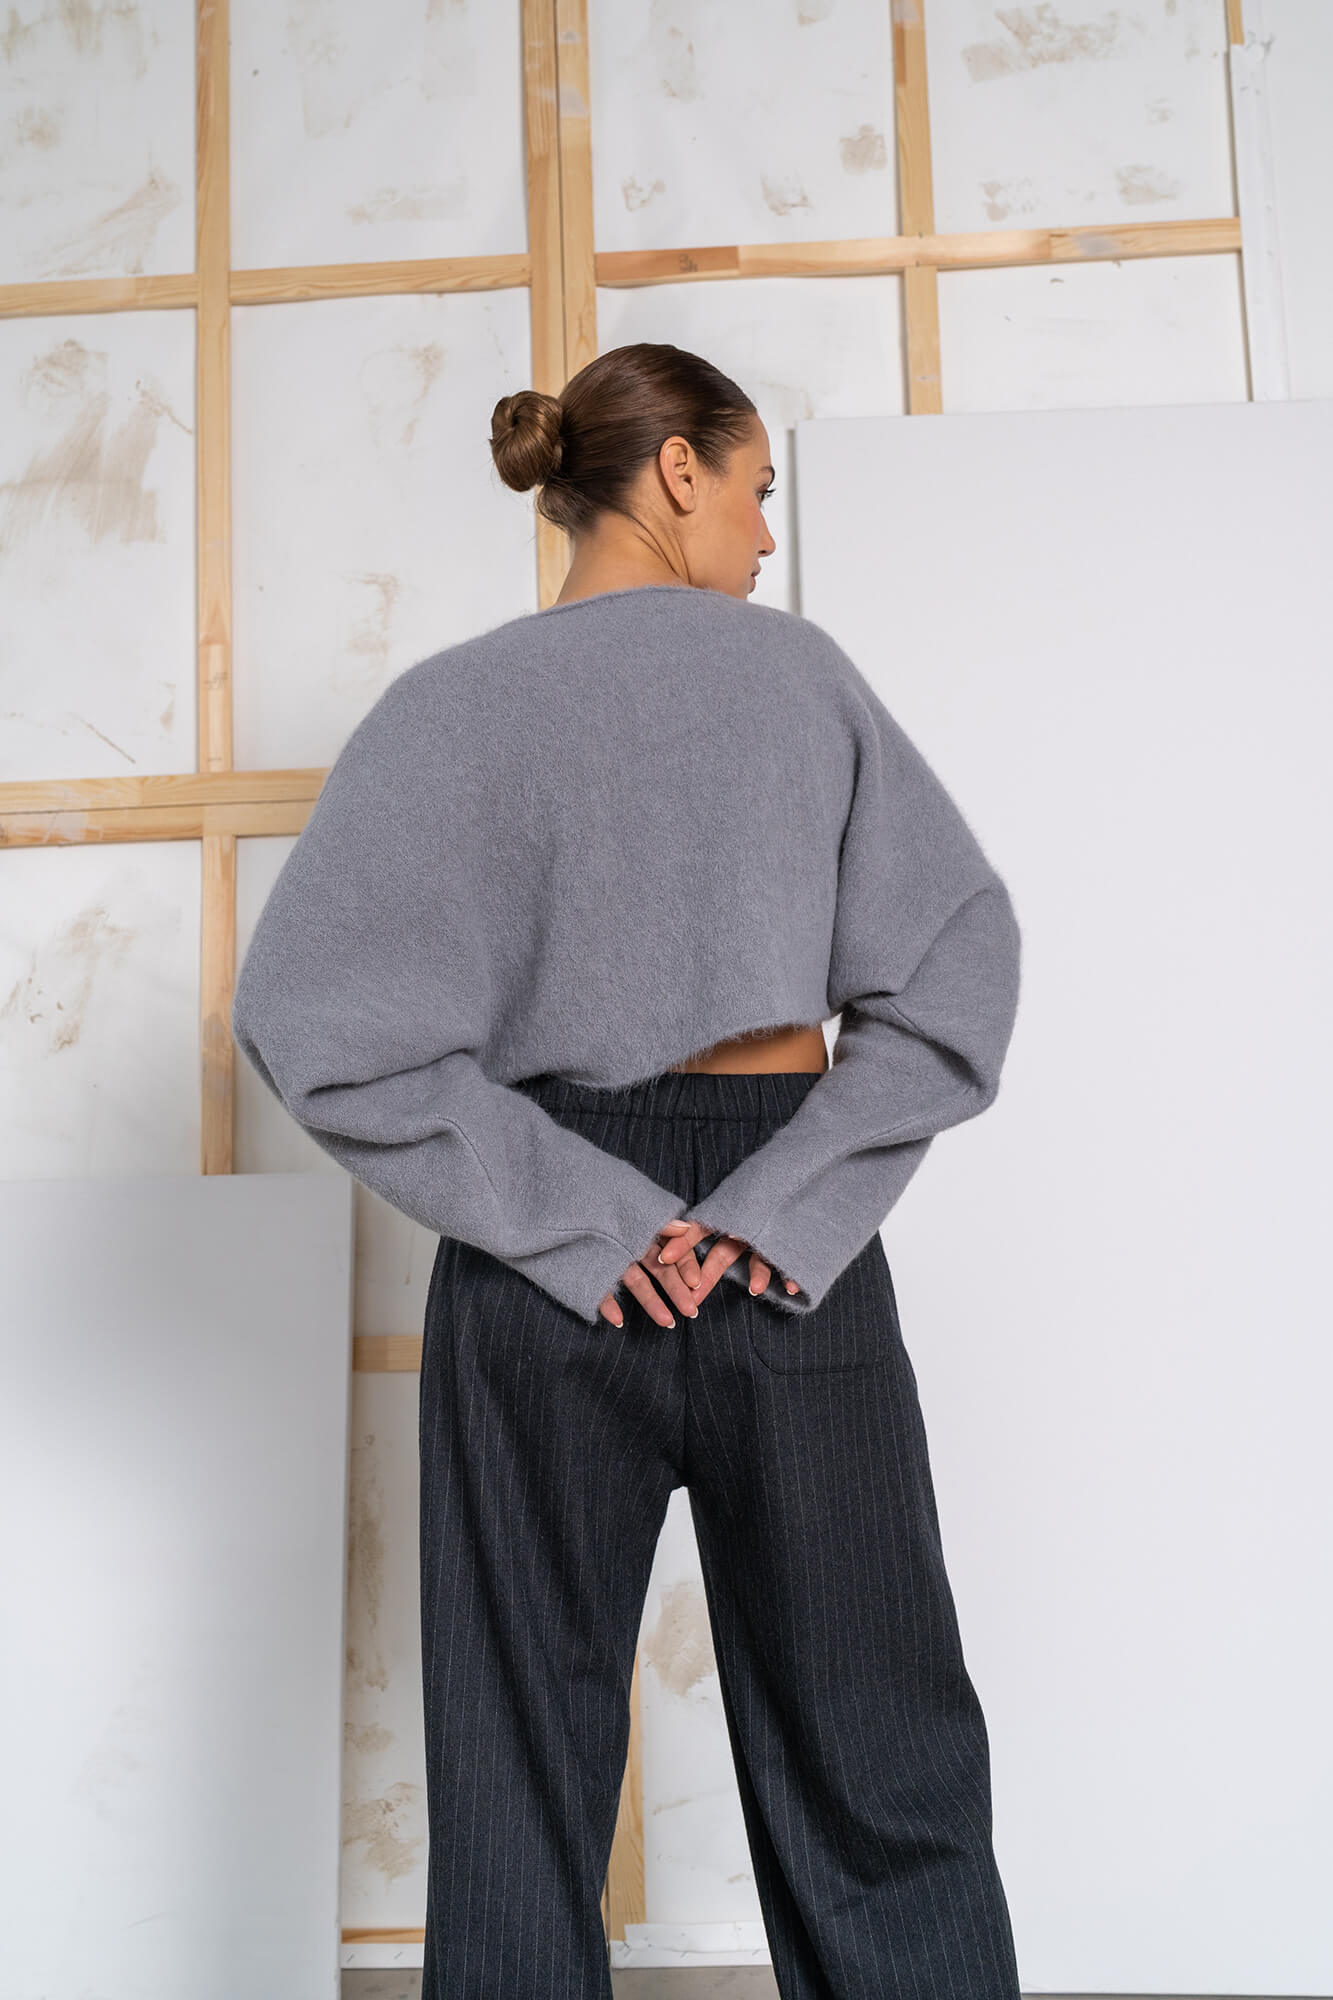 Cropped Pullover Karly in grau by VIVAL.STUDIO